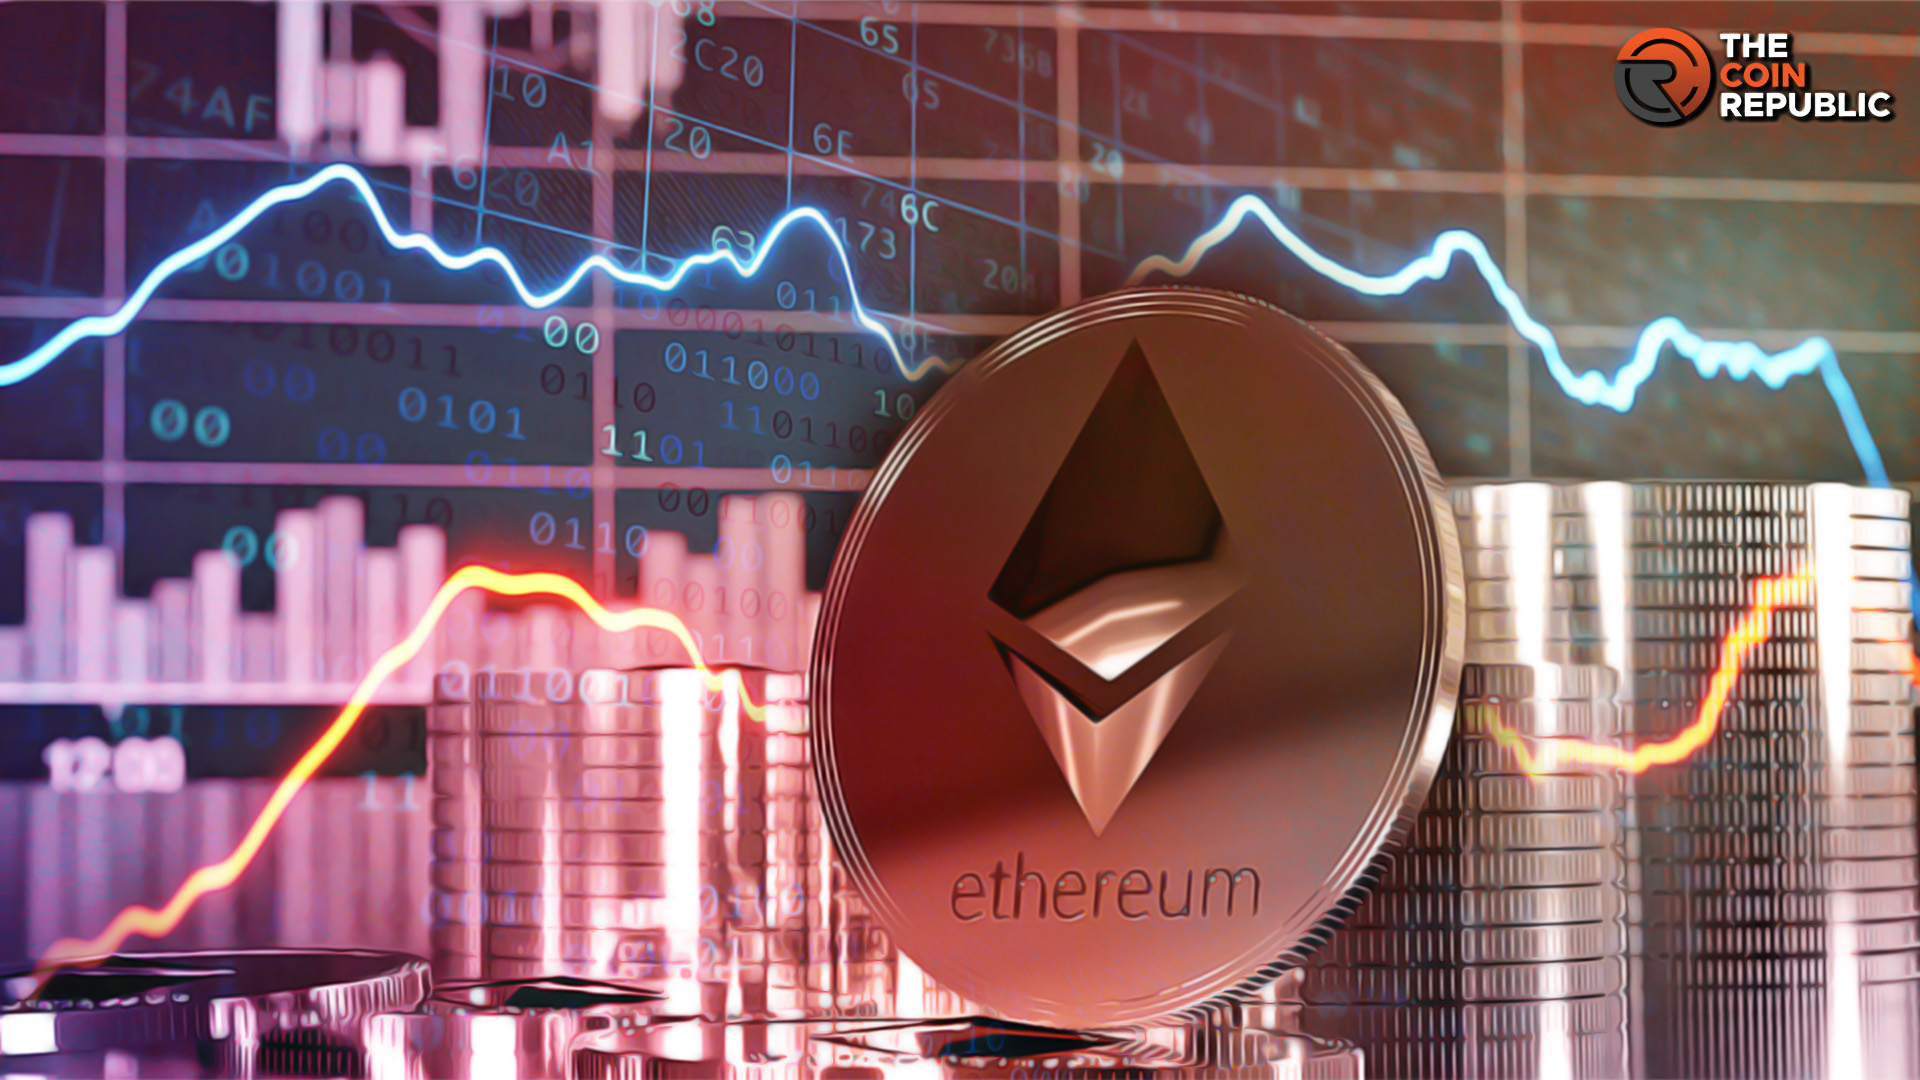 ETH Price Drop Amid Sale off as Celsius’ Bankruptcy Proceedings